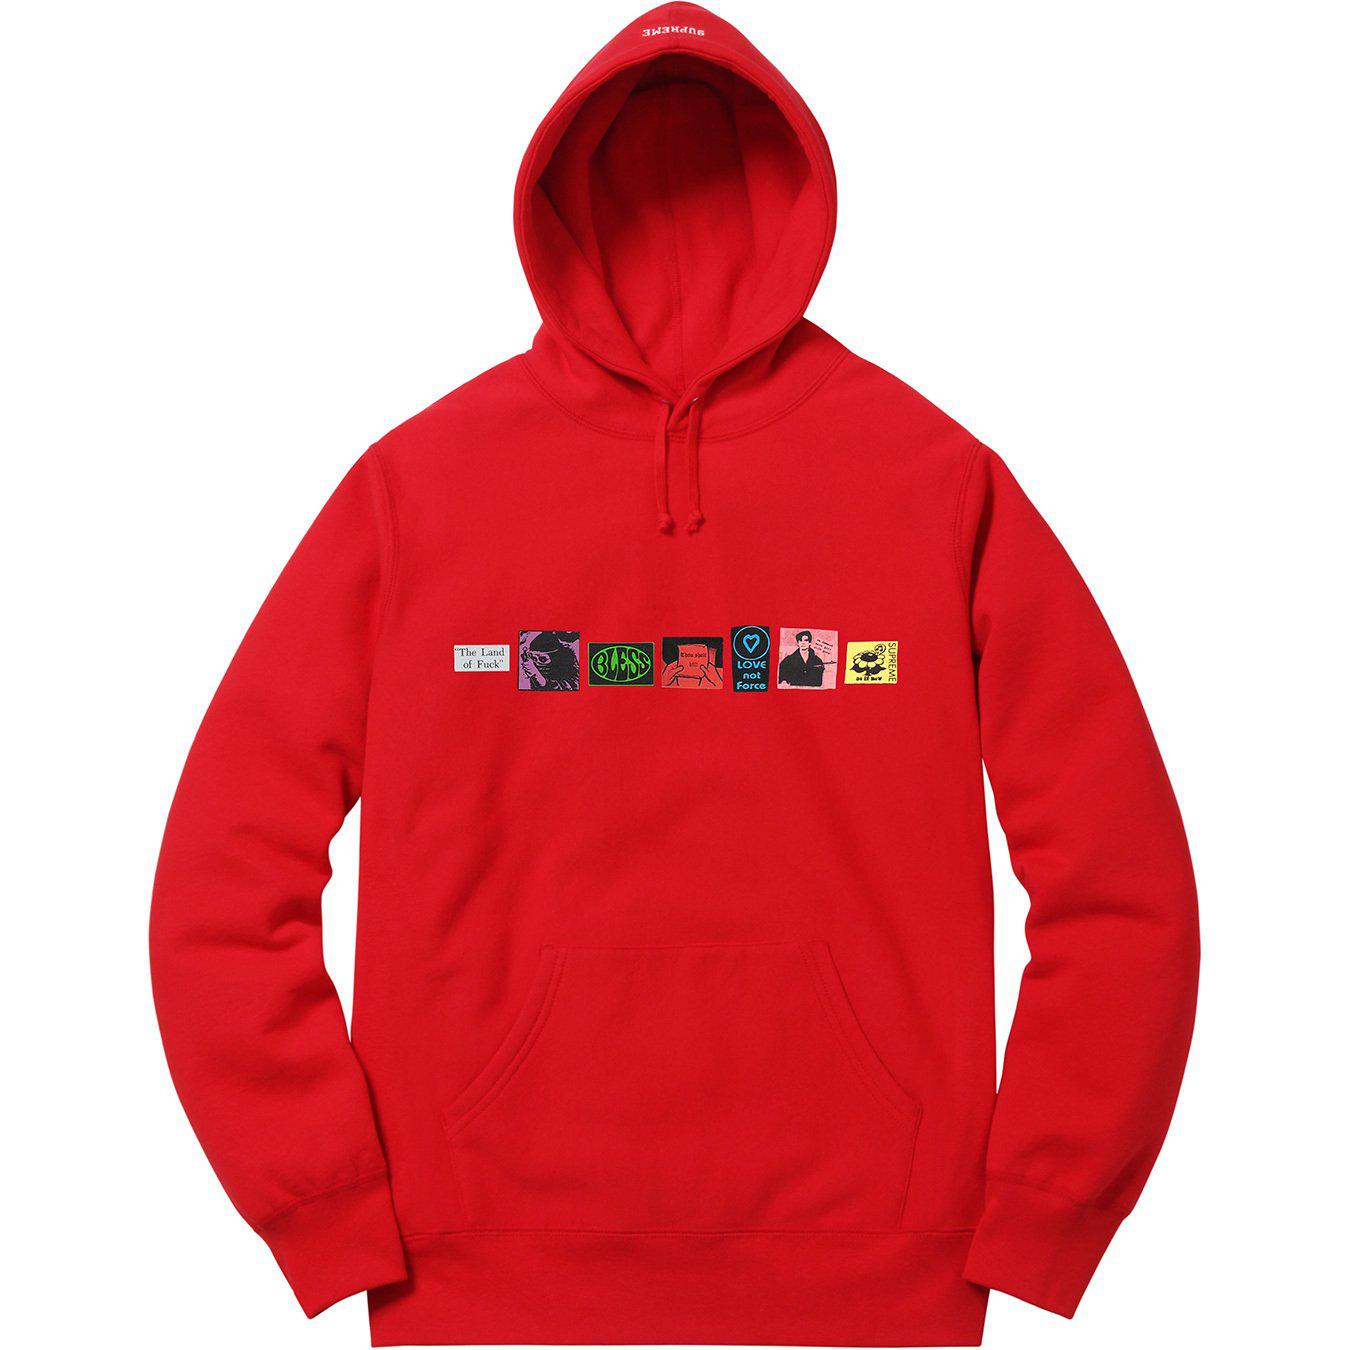 Supreme Bless Hooded Sweatshirt Red for Men - Lyst